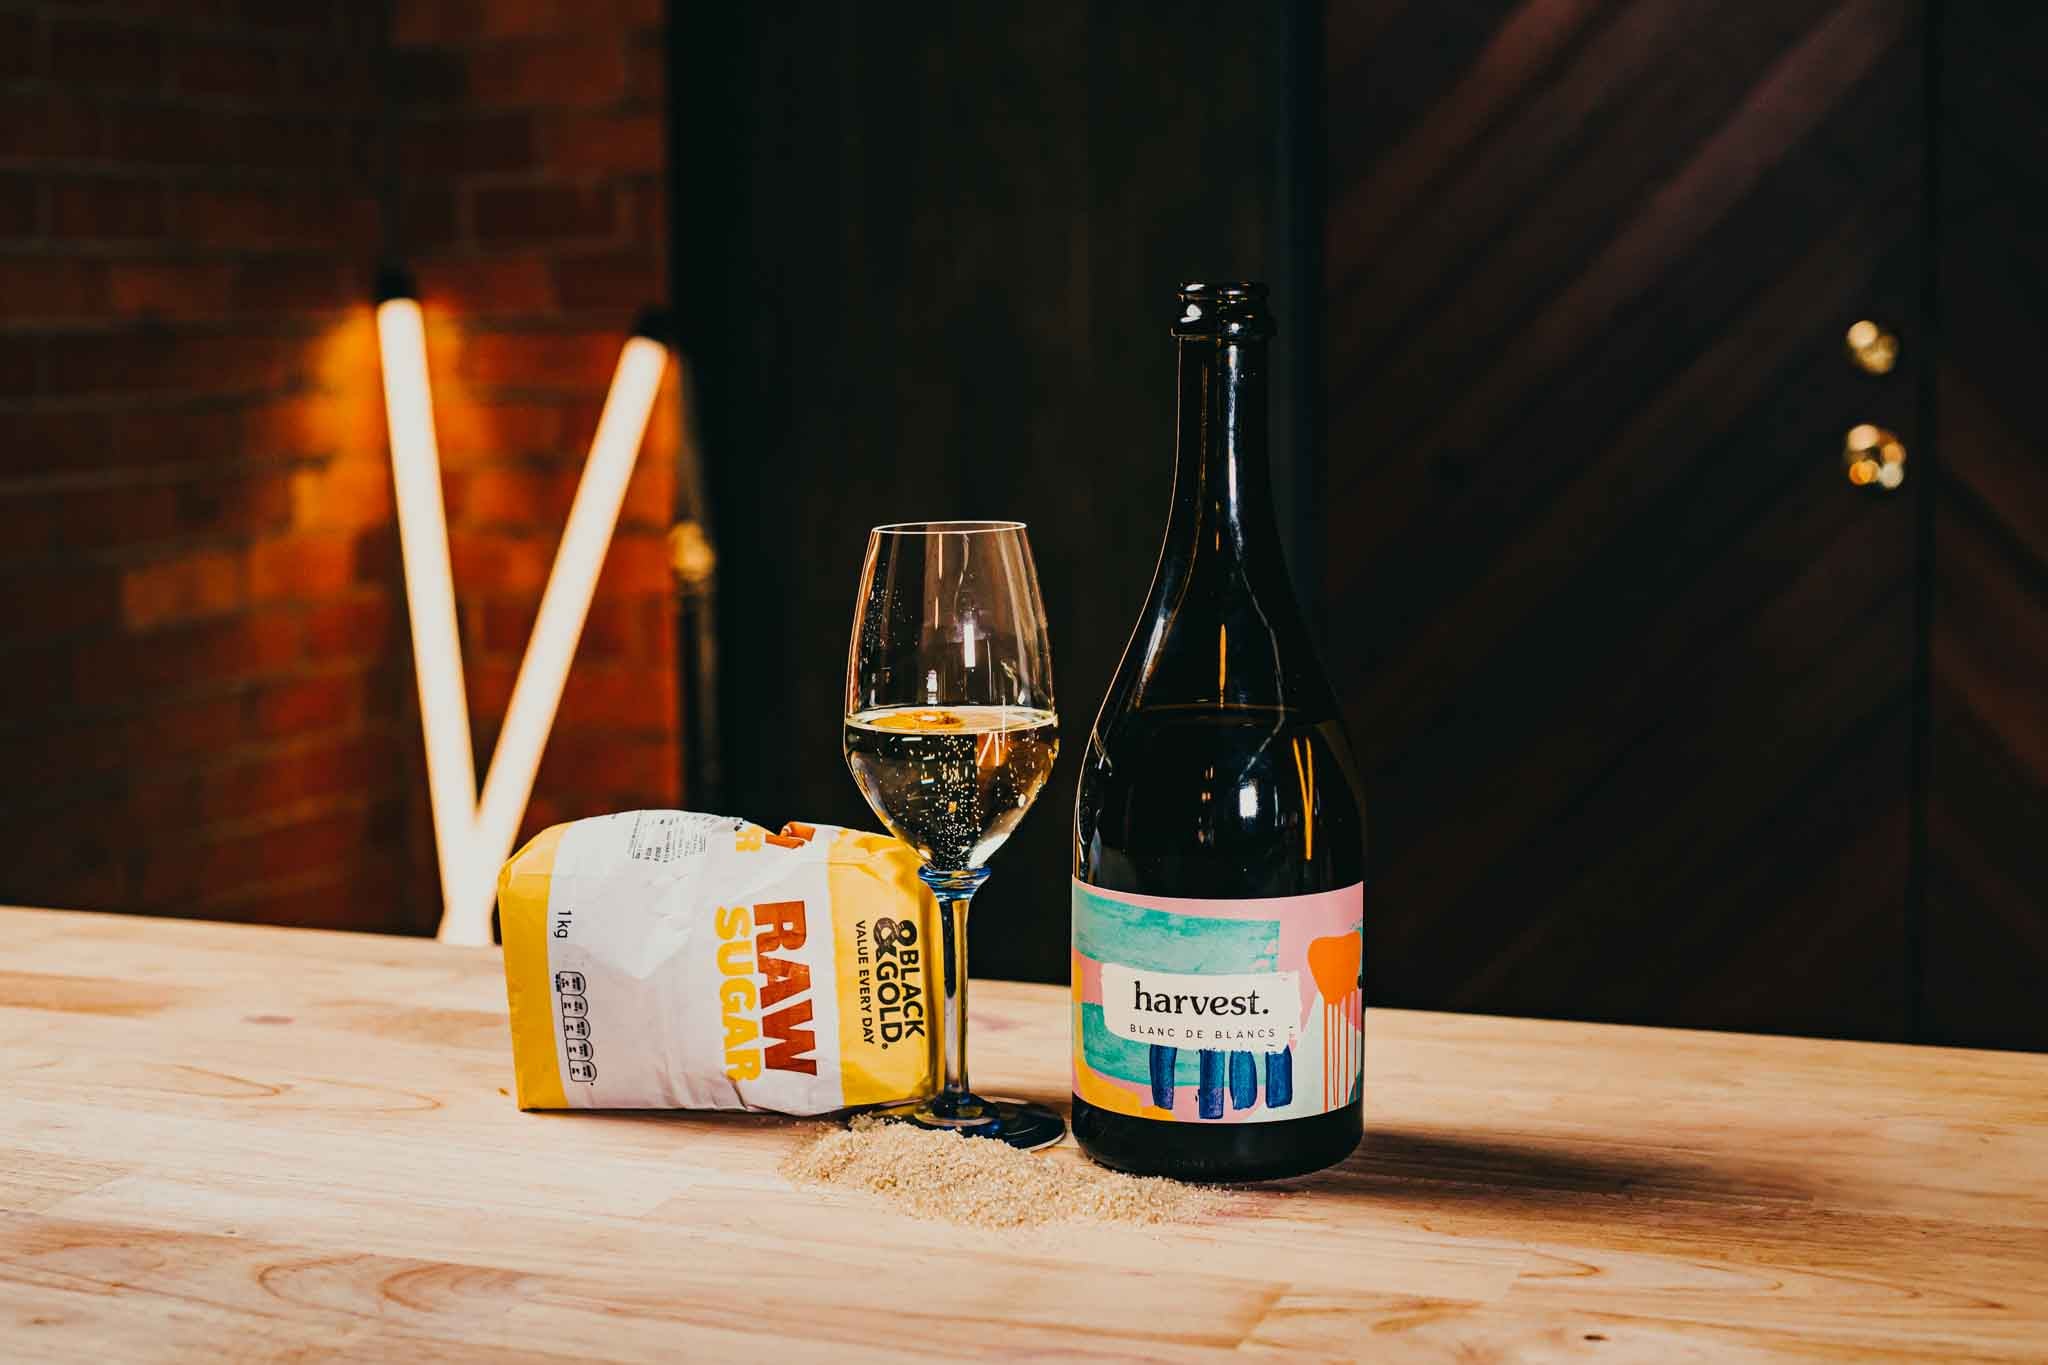 sugar and wine. a bottle sparkling wine and a bag of raw sugar 